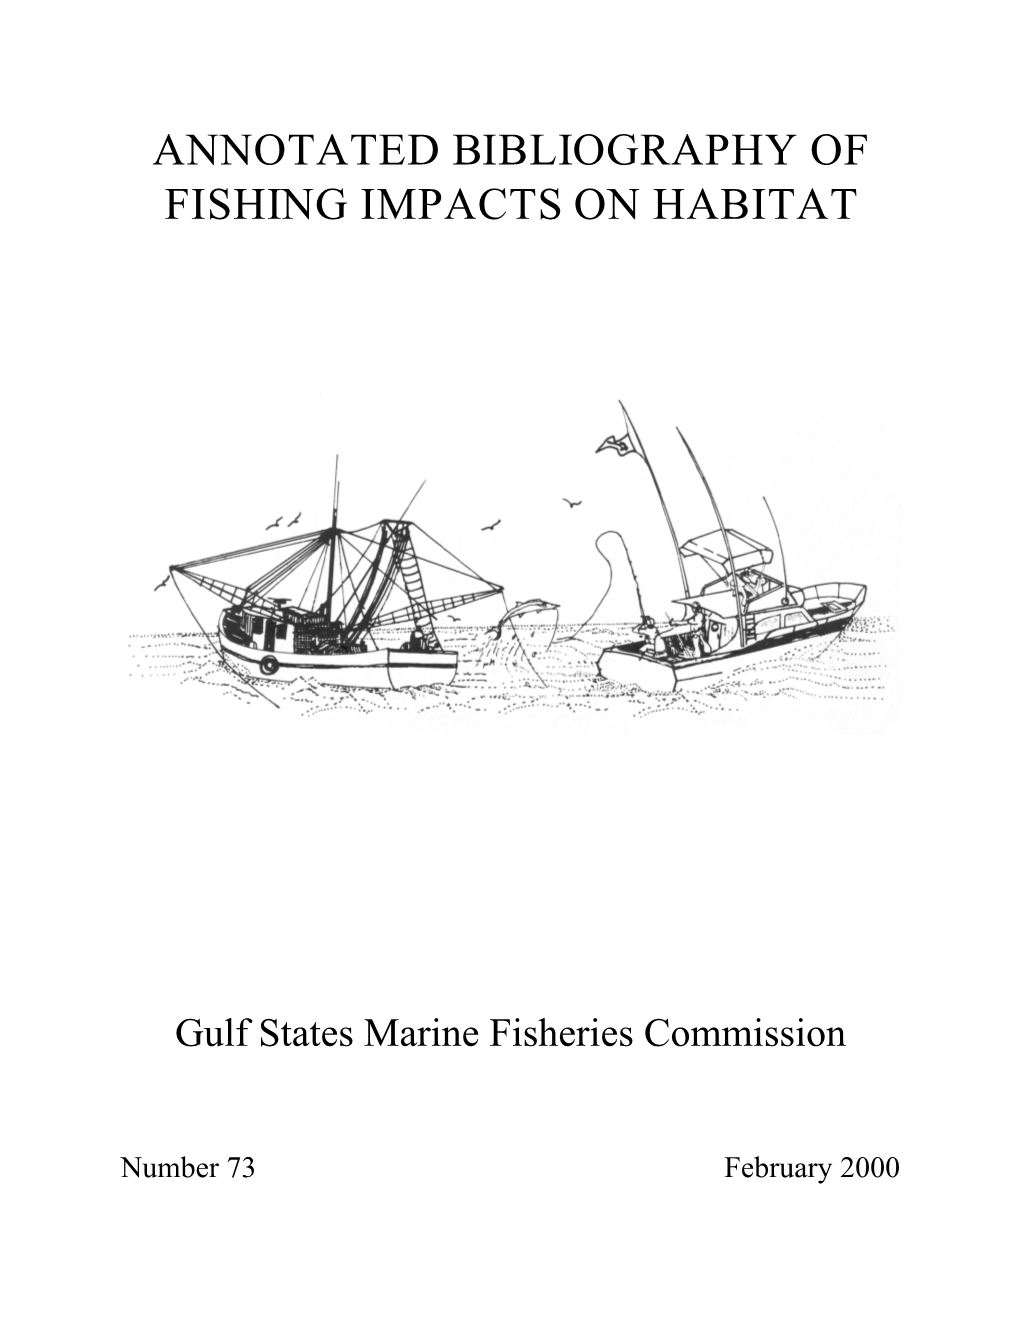 Annotated Bibliography of Fishing Impacts on Habitat